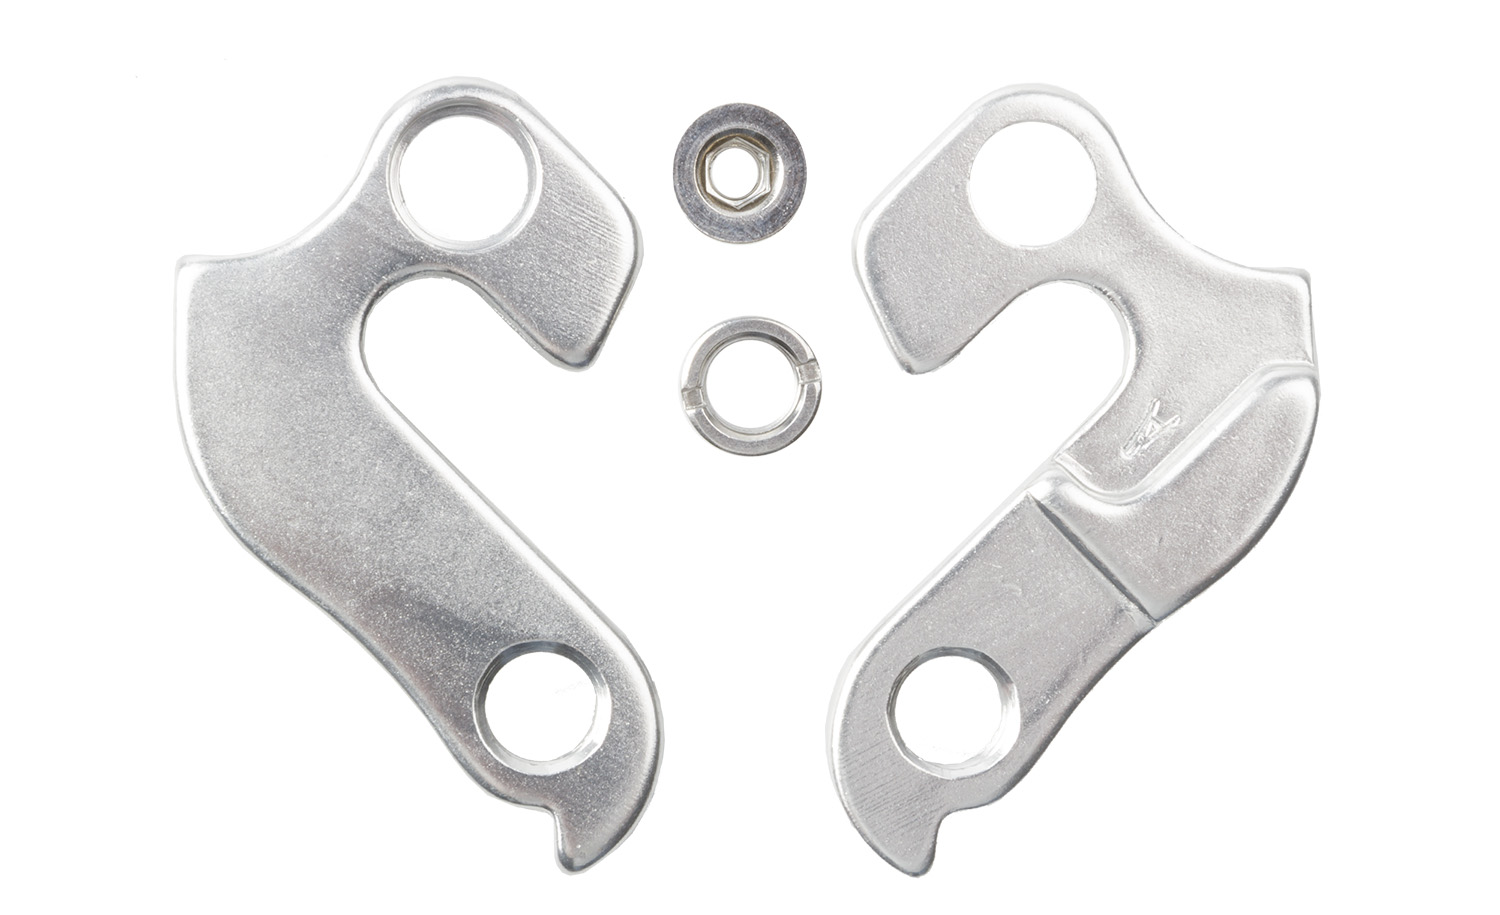 660878 S8 derailleur hanger – AVAILABLE IN SELECTED BIKE SHOPS